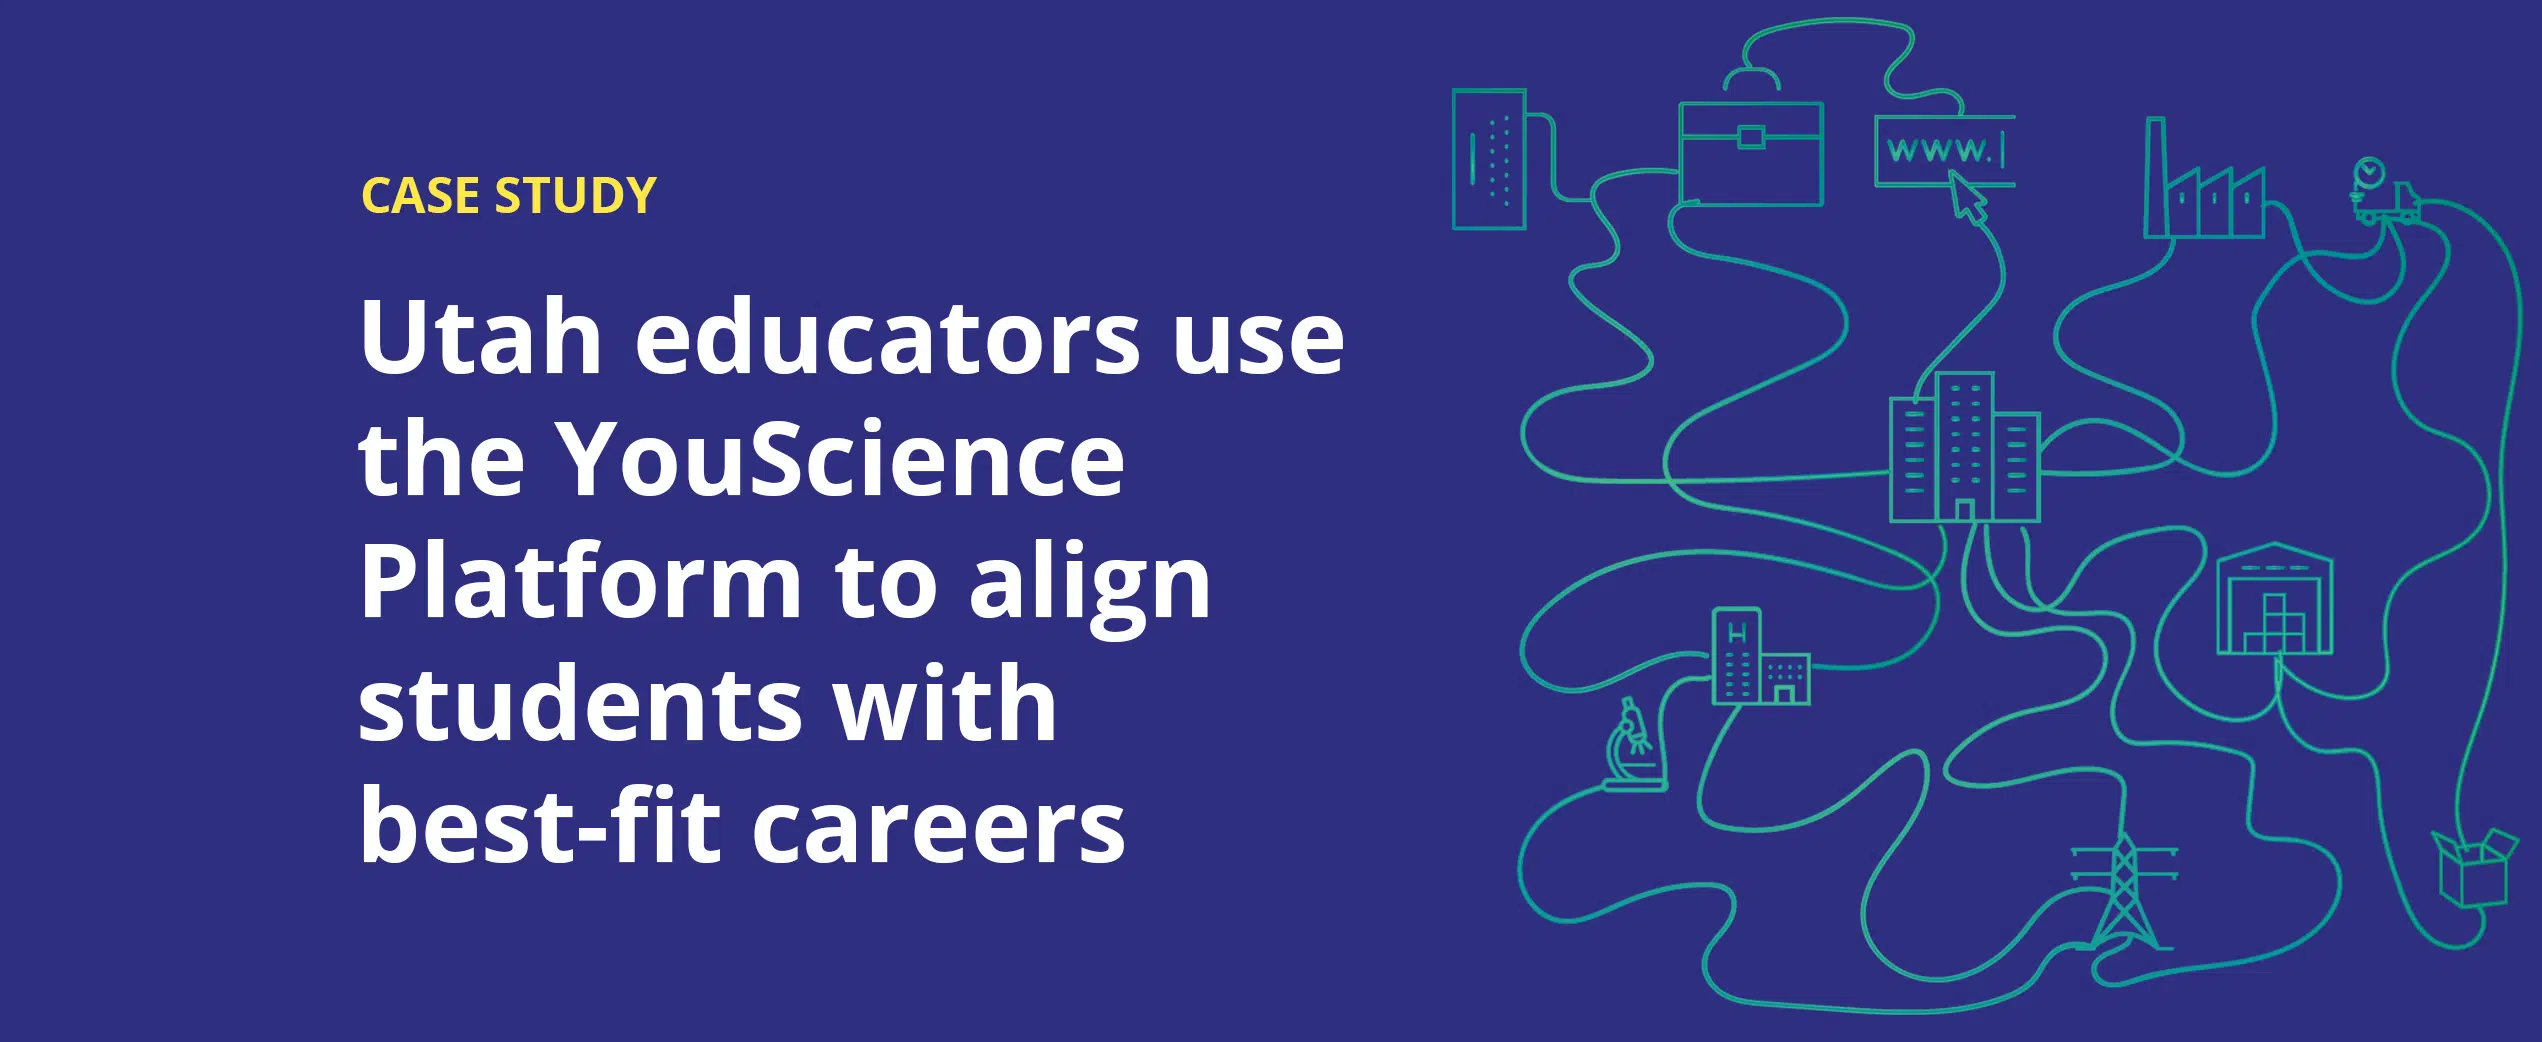 Utah educators use the YouScience Platform to align students with best-fit careers